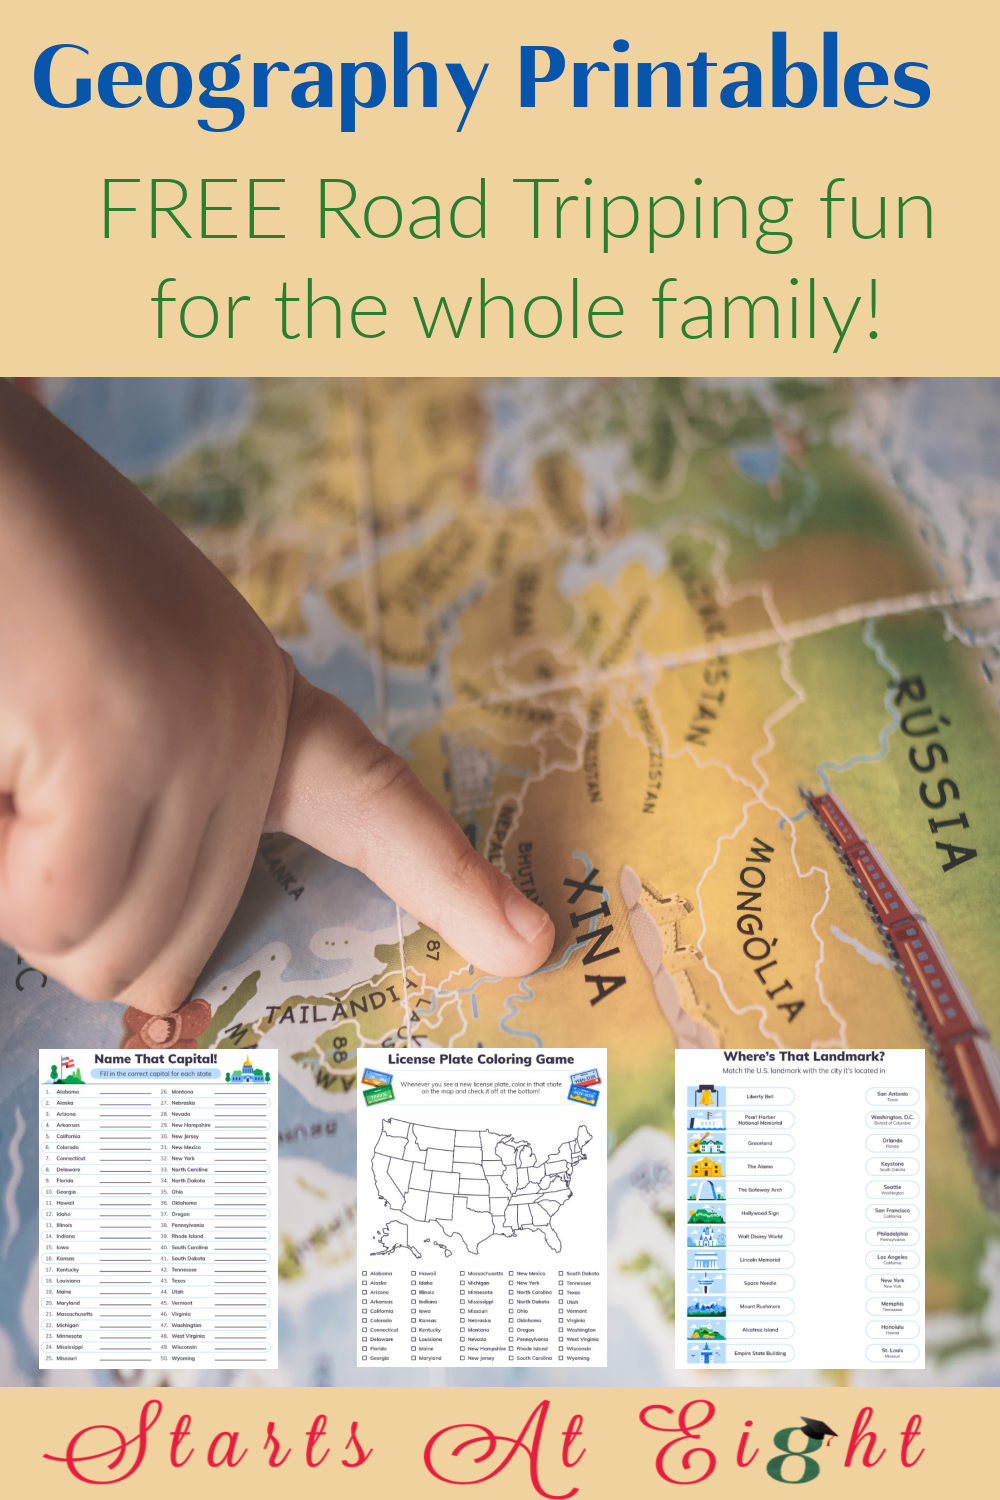 Geography Printables FREE Road Tripping fun for the whole family with these FREE printables games and activities for use when traveling!